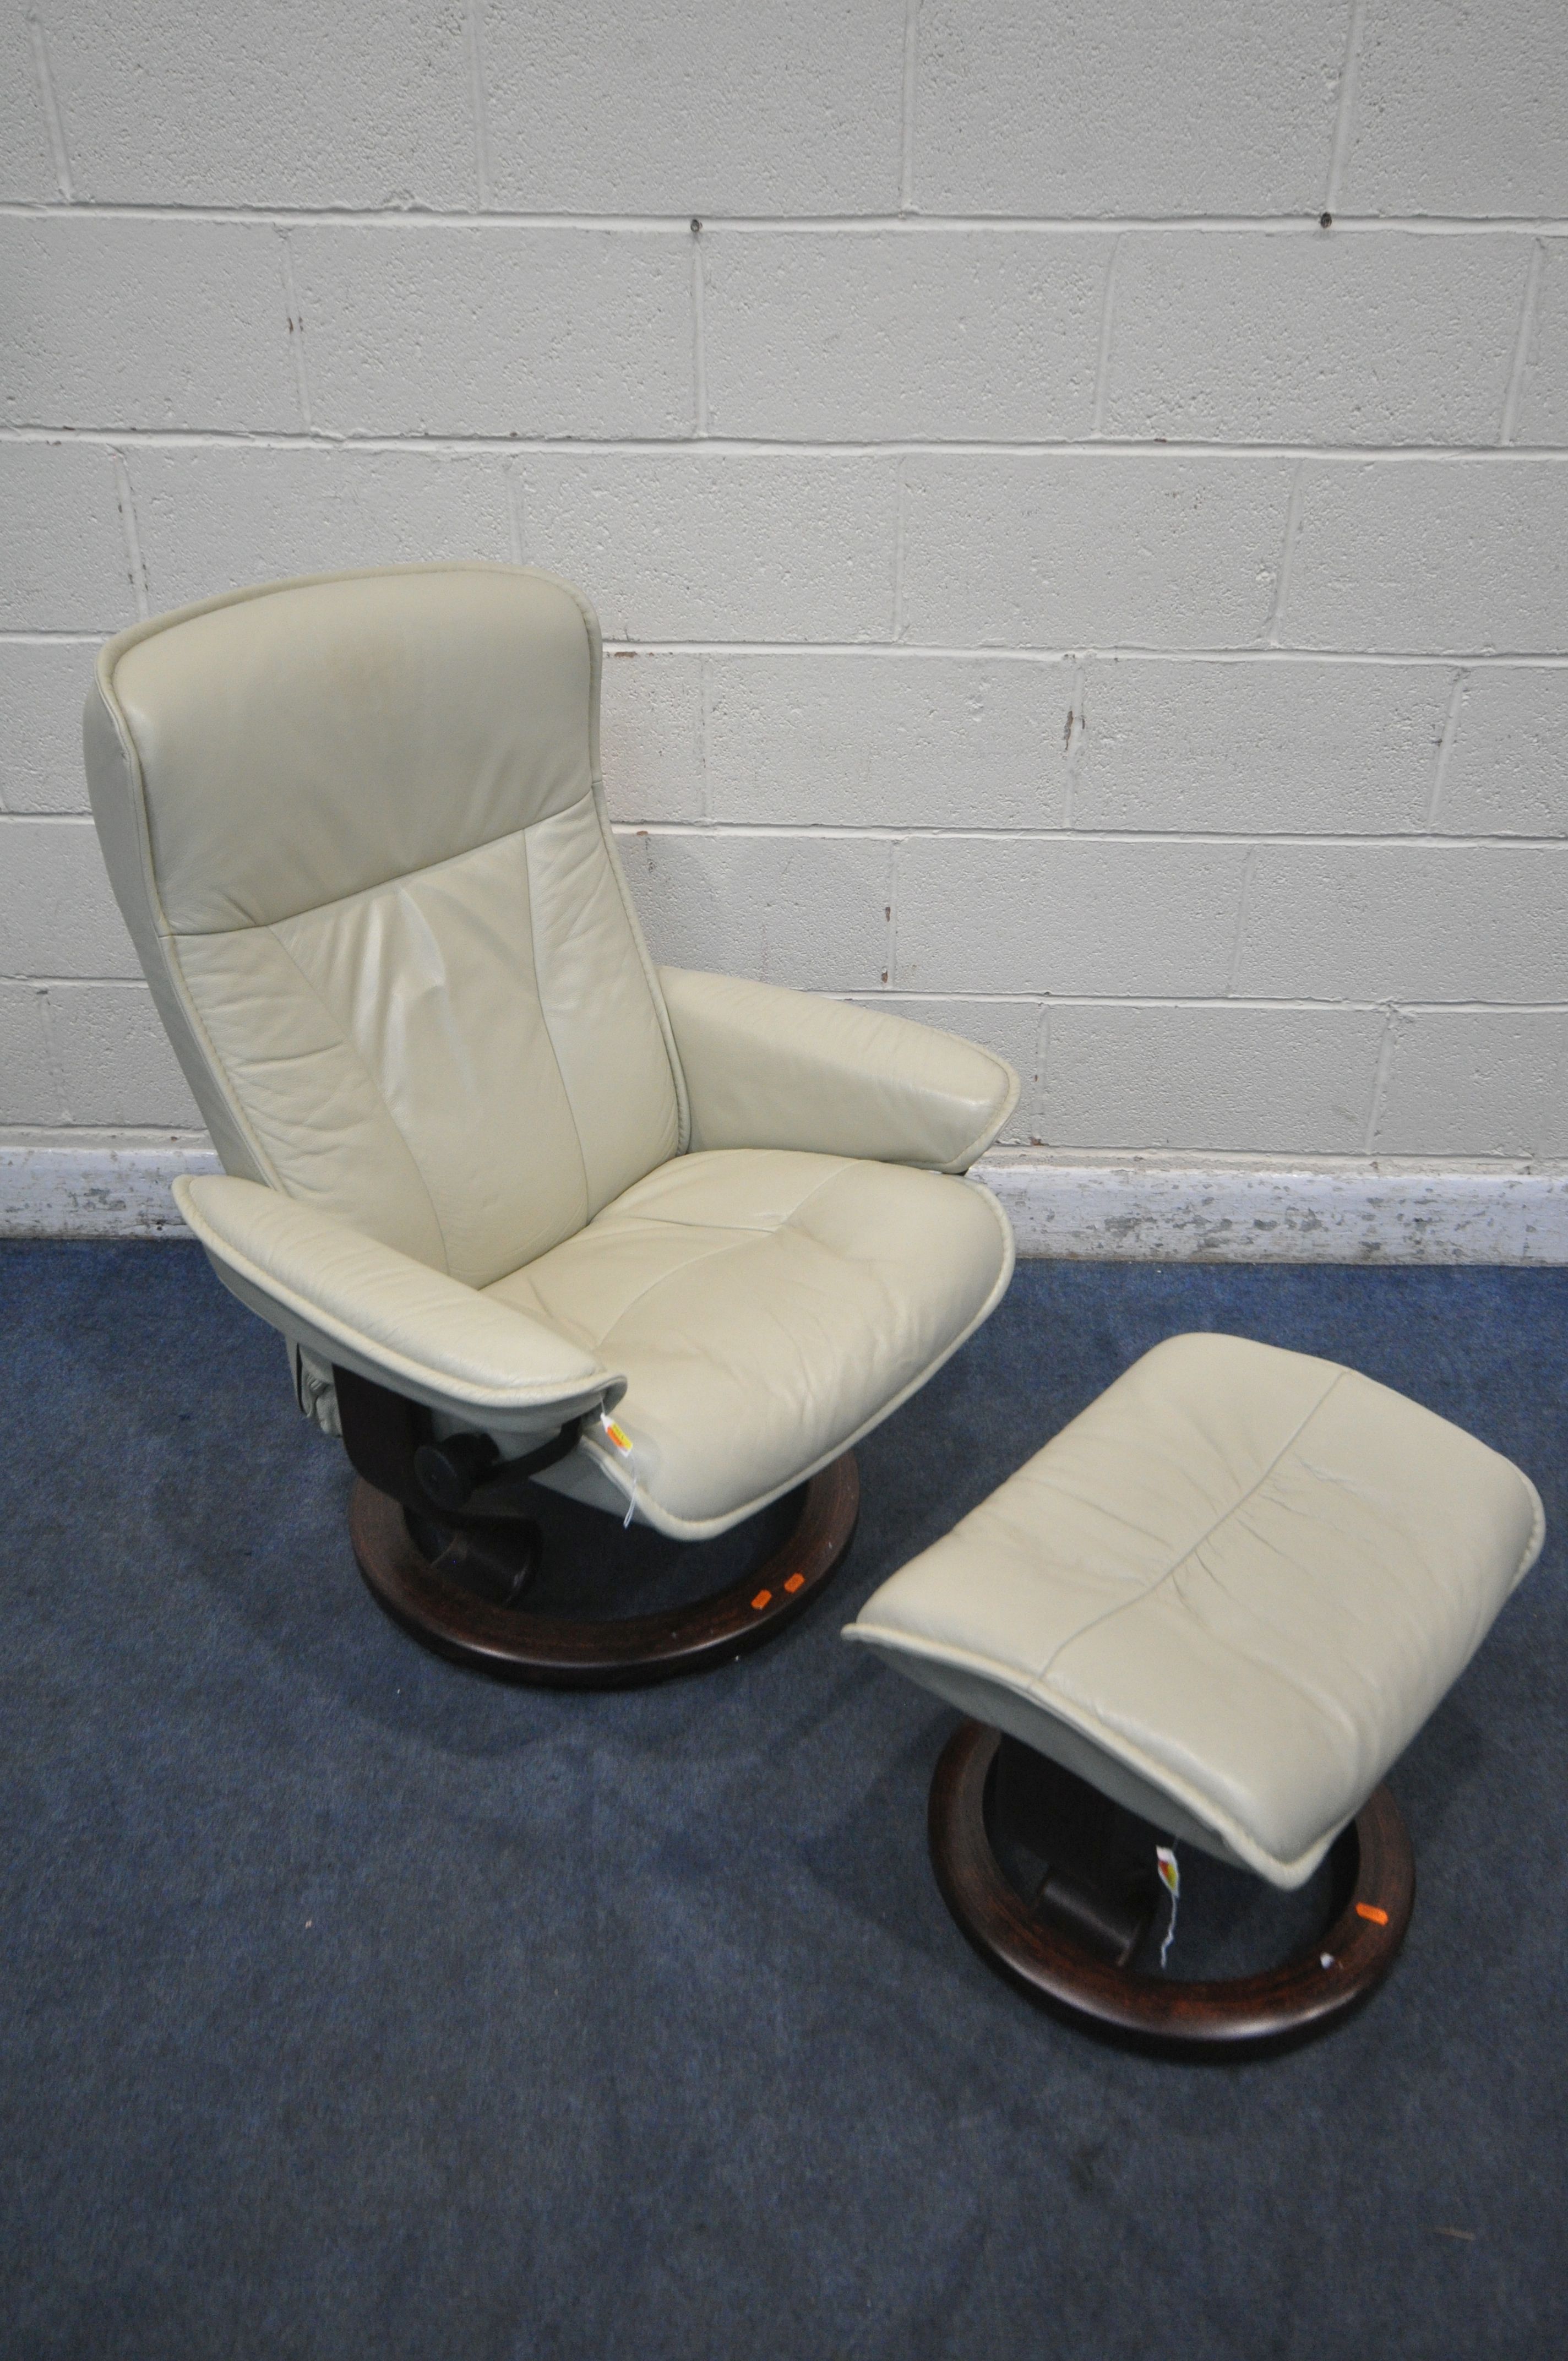 AN EKORNES STRESSLESS CREAM LEATHER RECLINING ARMCHAIR, with a matching footstool (condition report: